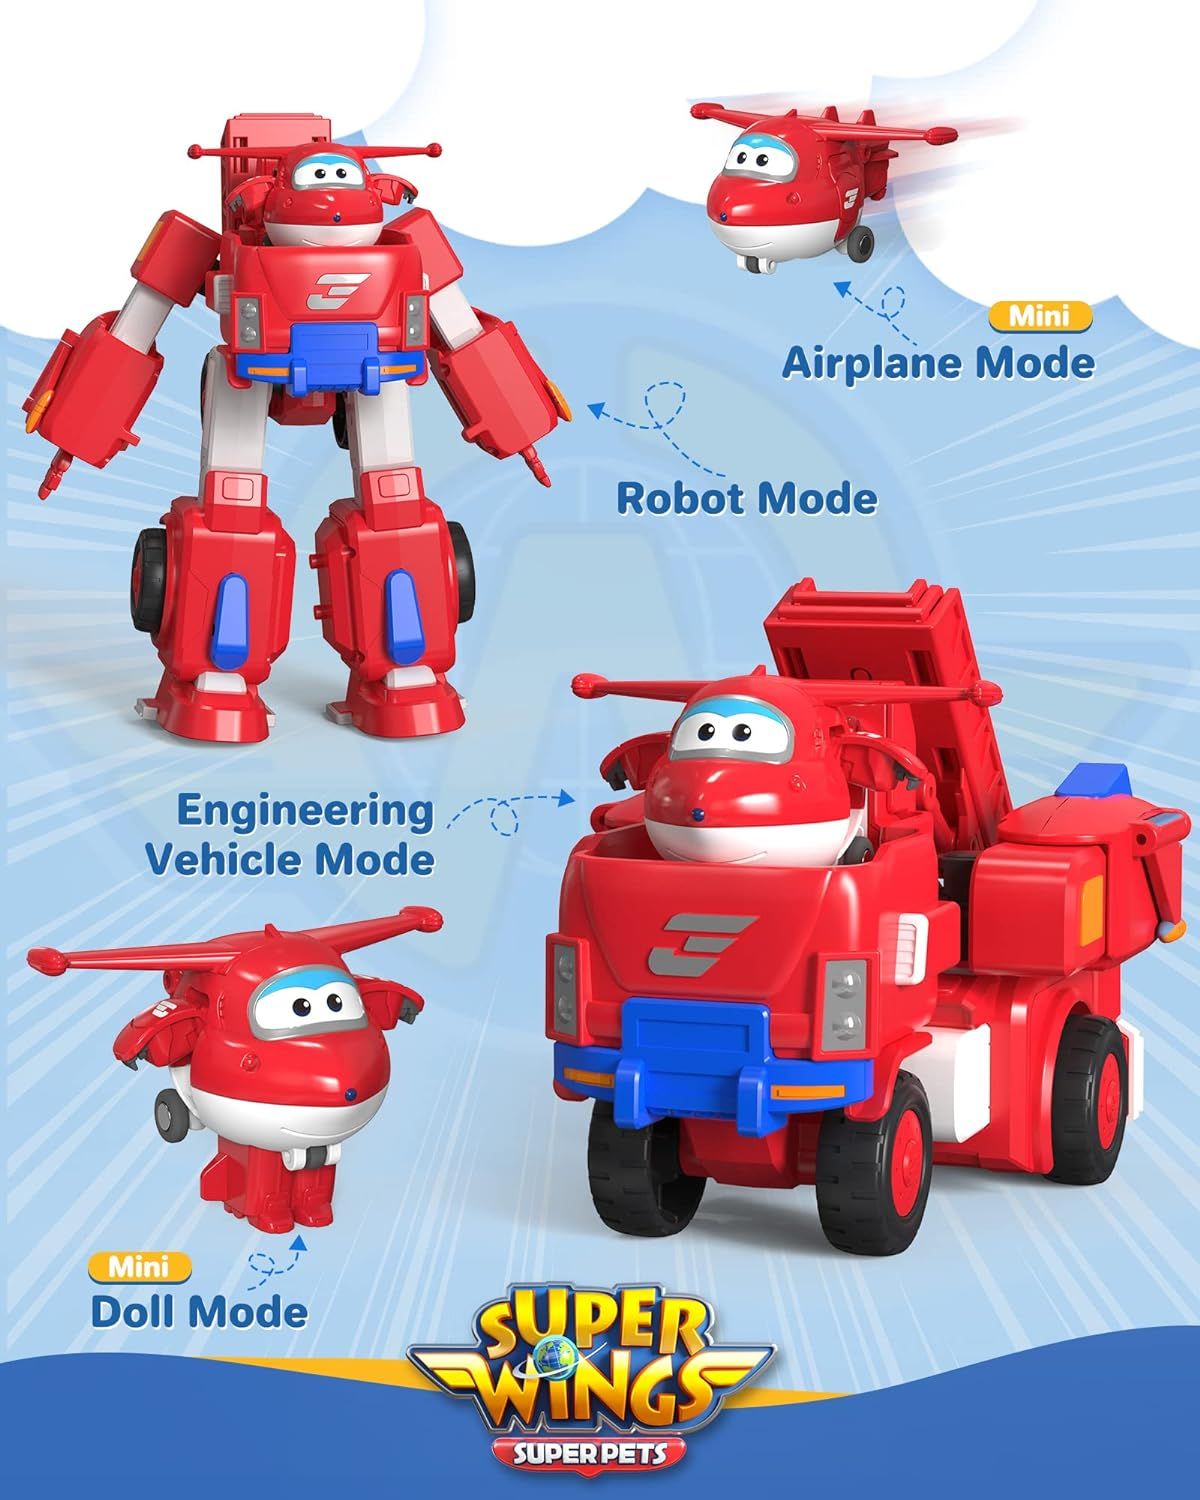 Super Wings Toys, Transformer Toys 2 Inch, Airplane Toy for Kids 3-5 Years  Old, 15 Packs Transforming Jet Playset, Real Mobile Wheels, Birthday Party